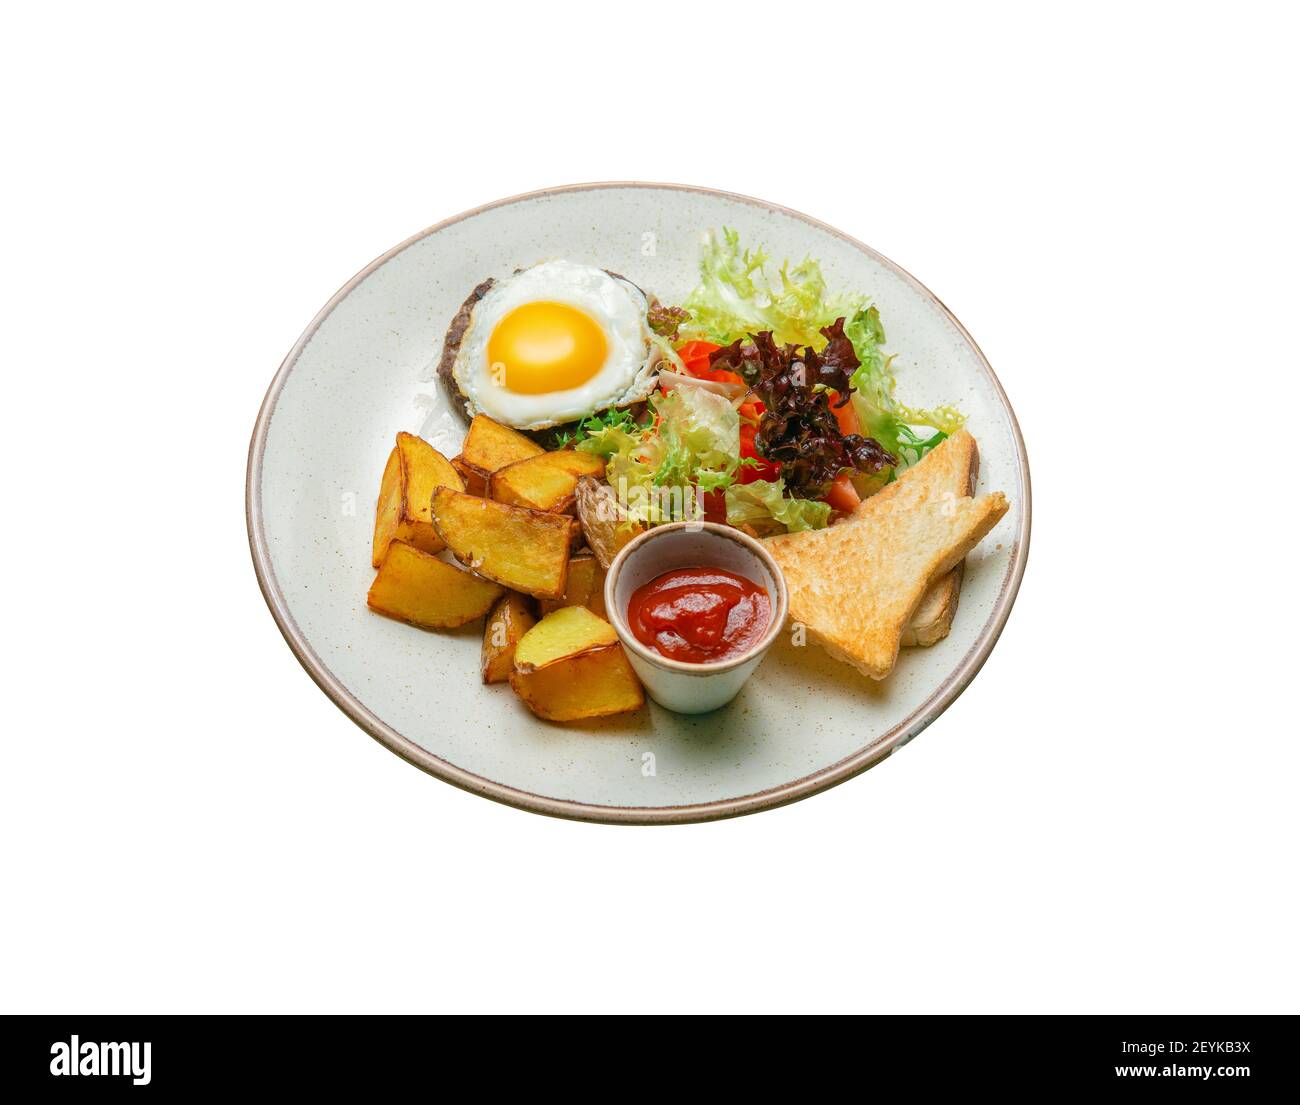 Fried potatoes with scrambled eggs and cutlet. Toast, vegetable salad and ketchup. Hearty breakfast. Stock Photo